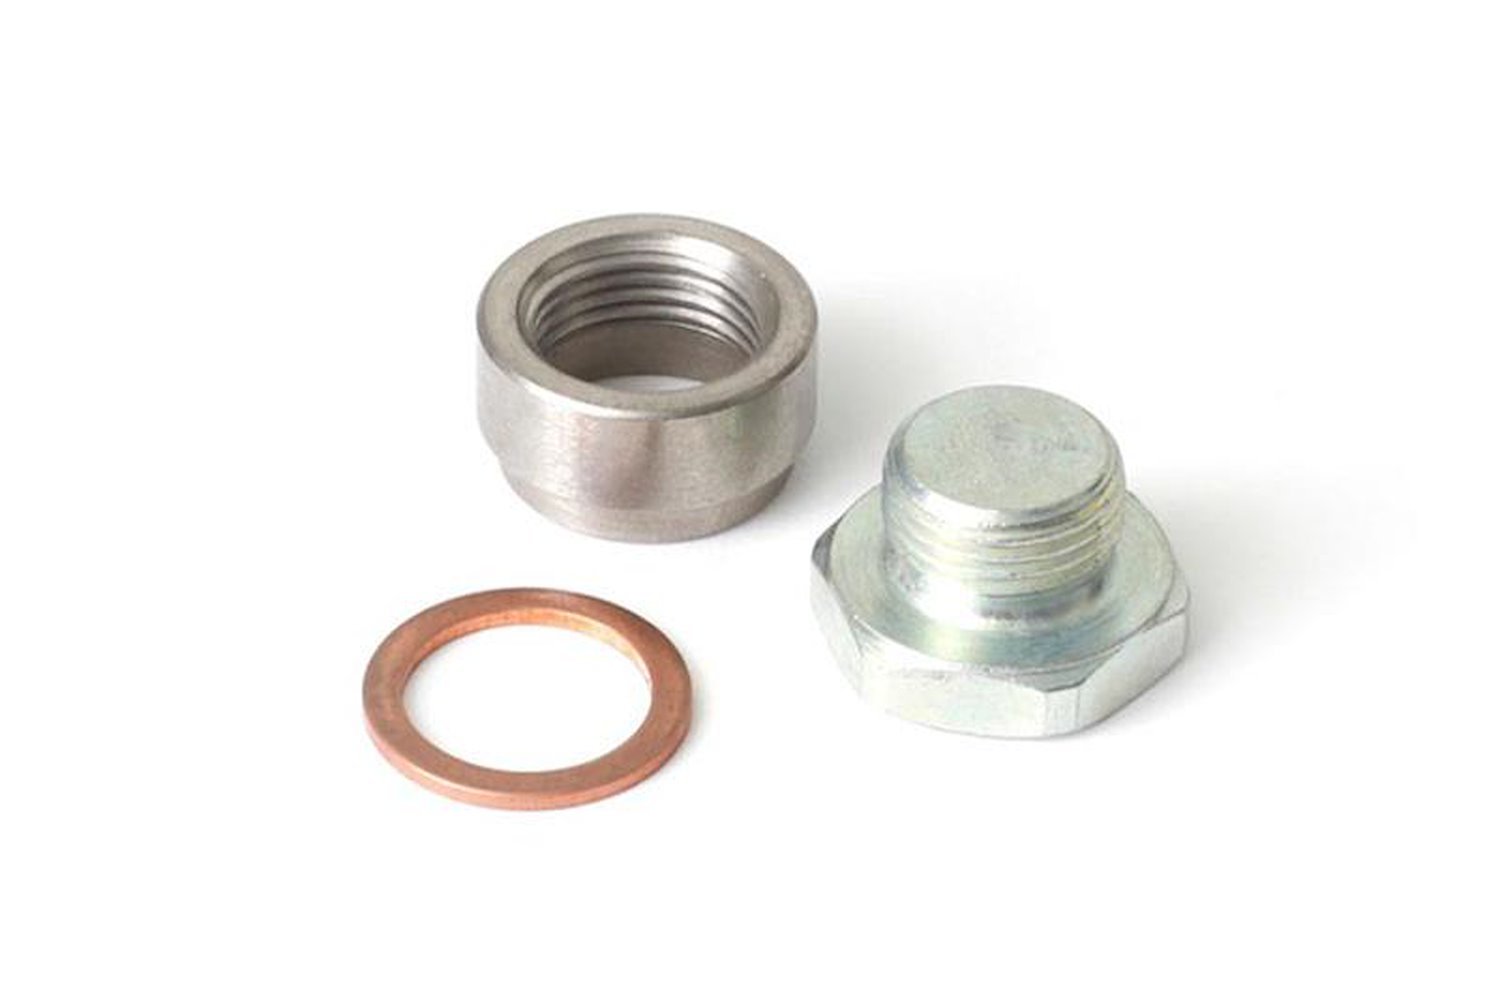 HT-010702 O2 Sensor Weldable Fitting Bung and Blanking Plug, M18 x1.5